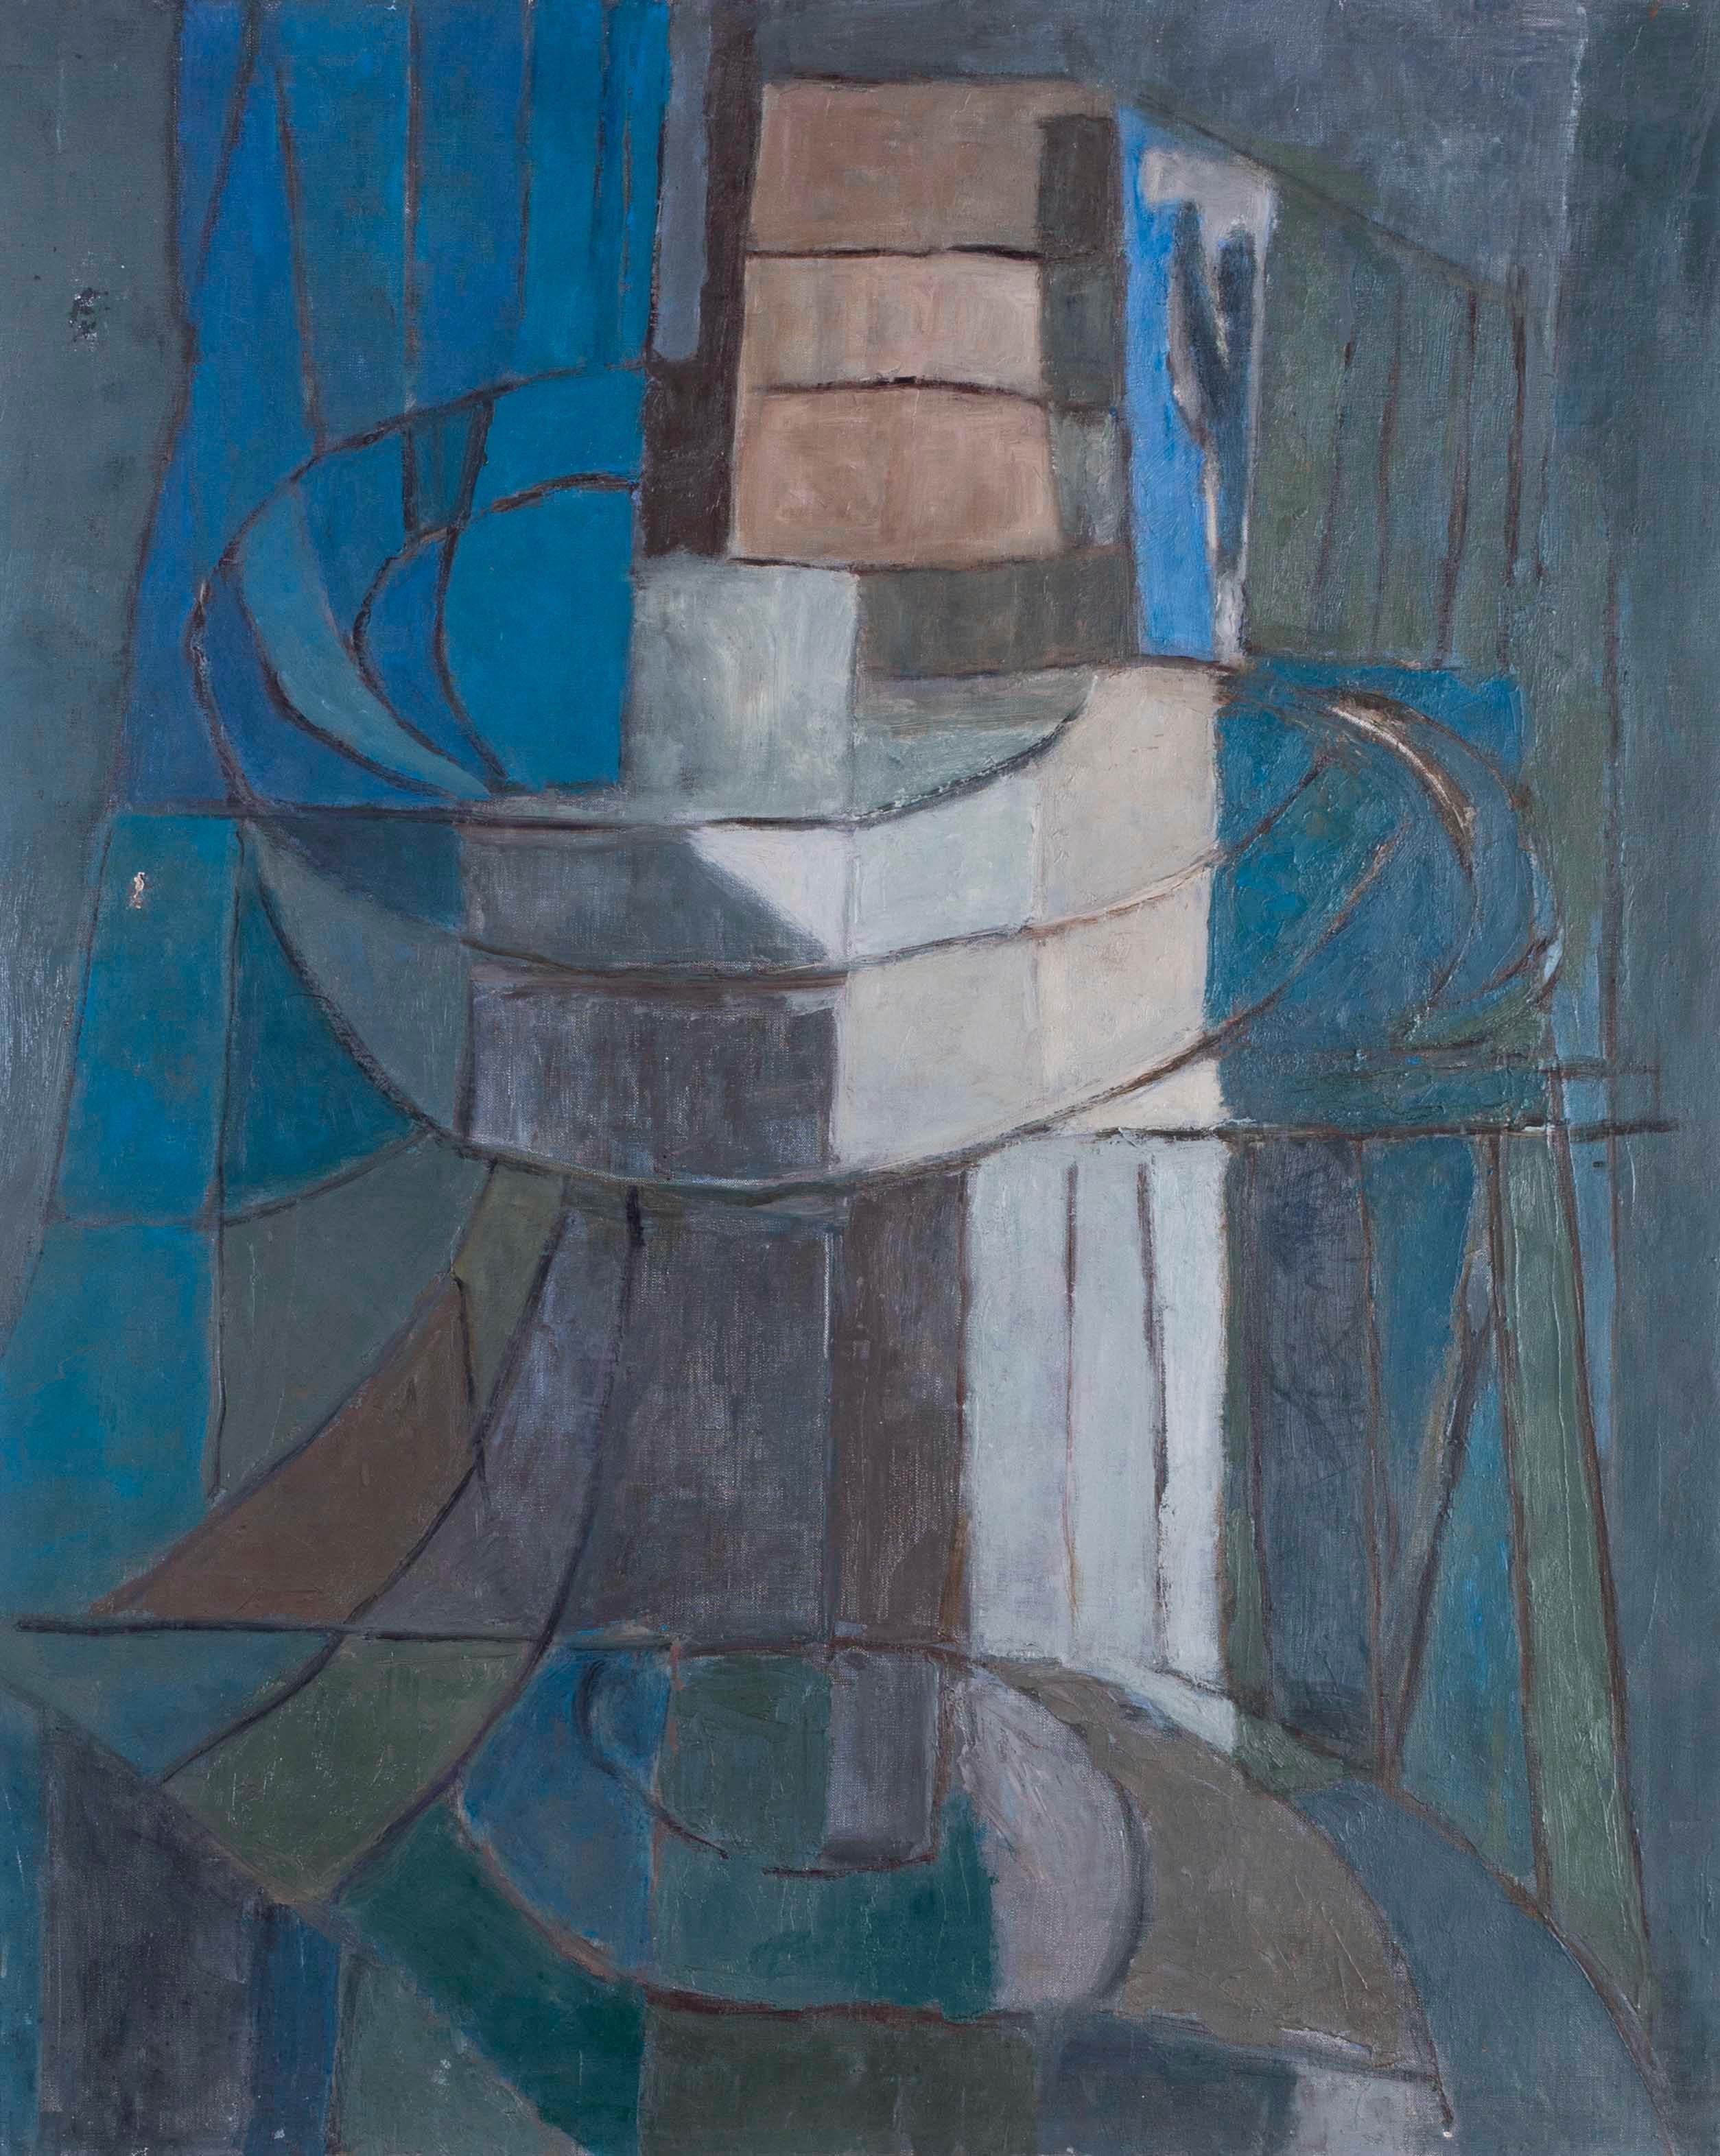 Mid 20th Century French abstract painting 'Abstract in blue, green and grey' - Gray Abstract Painting by Henri d’Amfreville